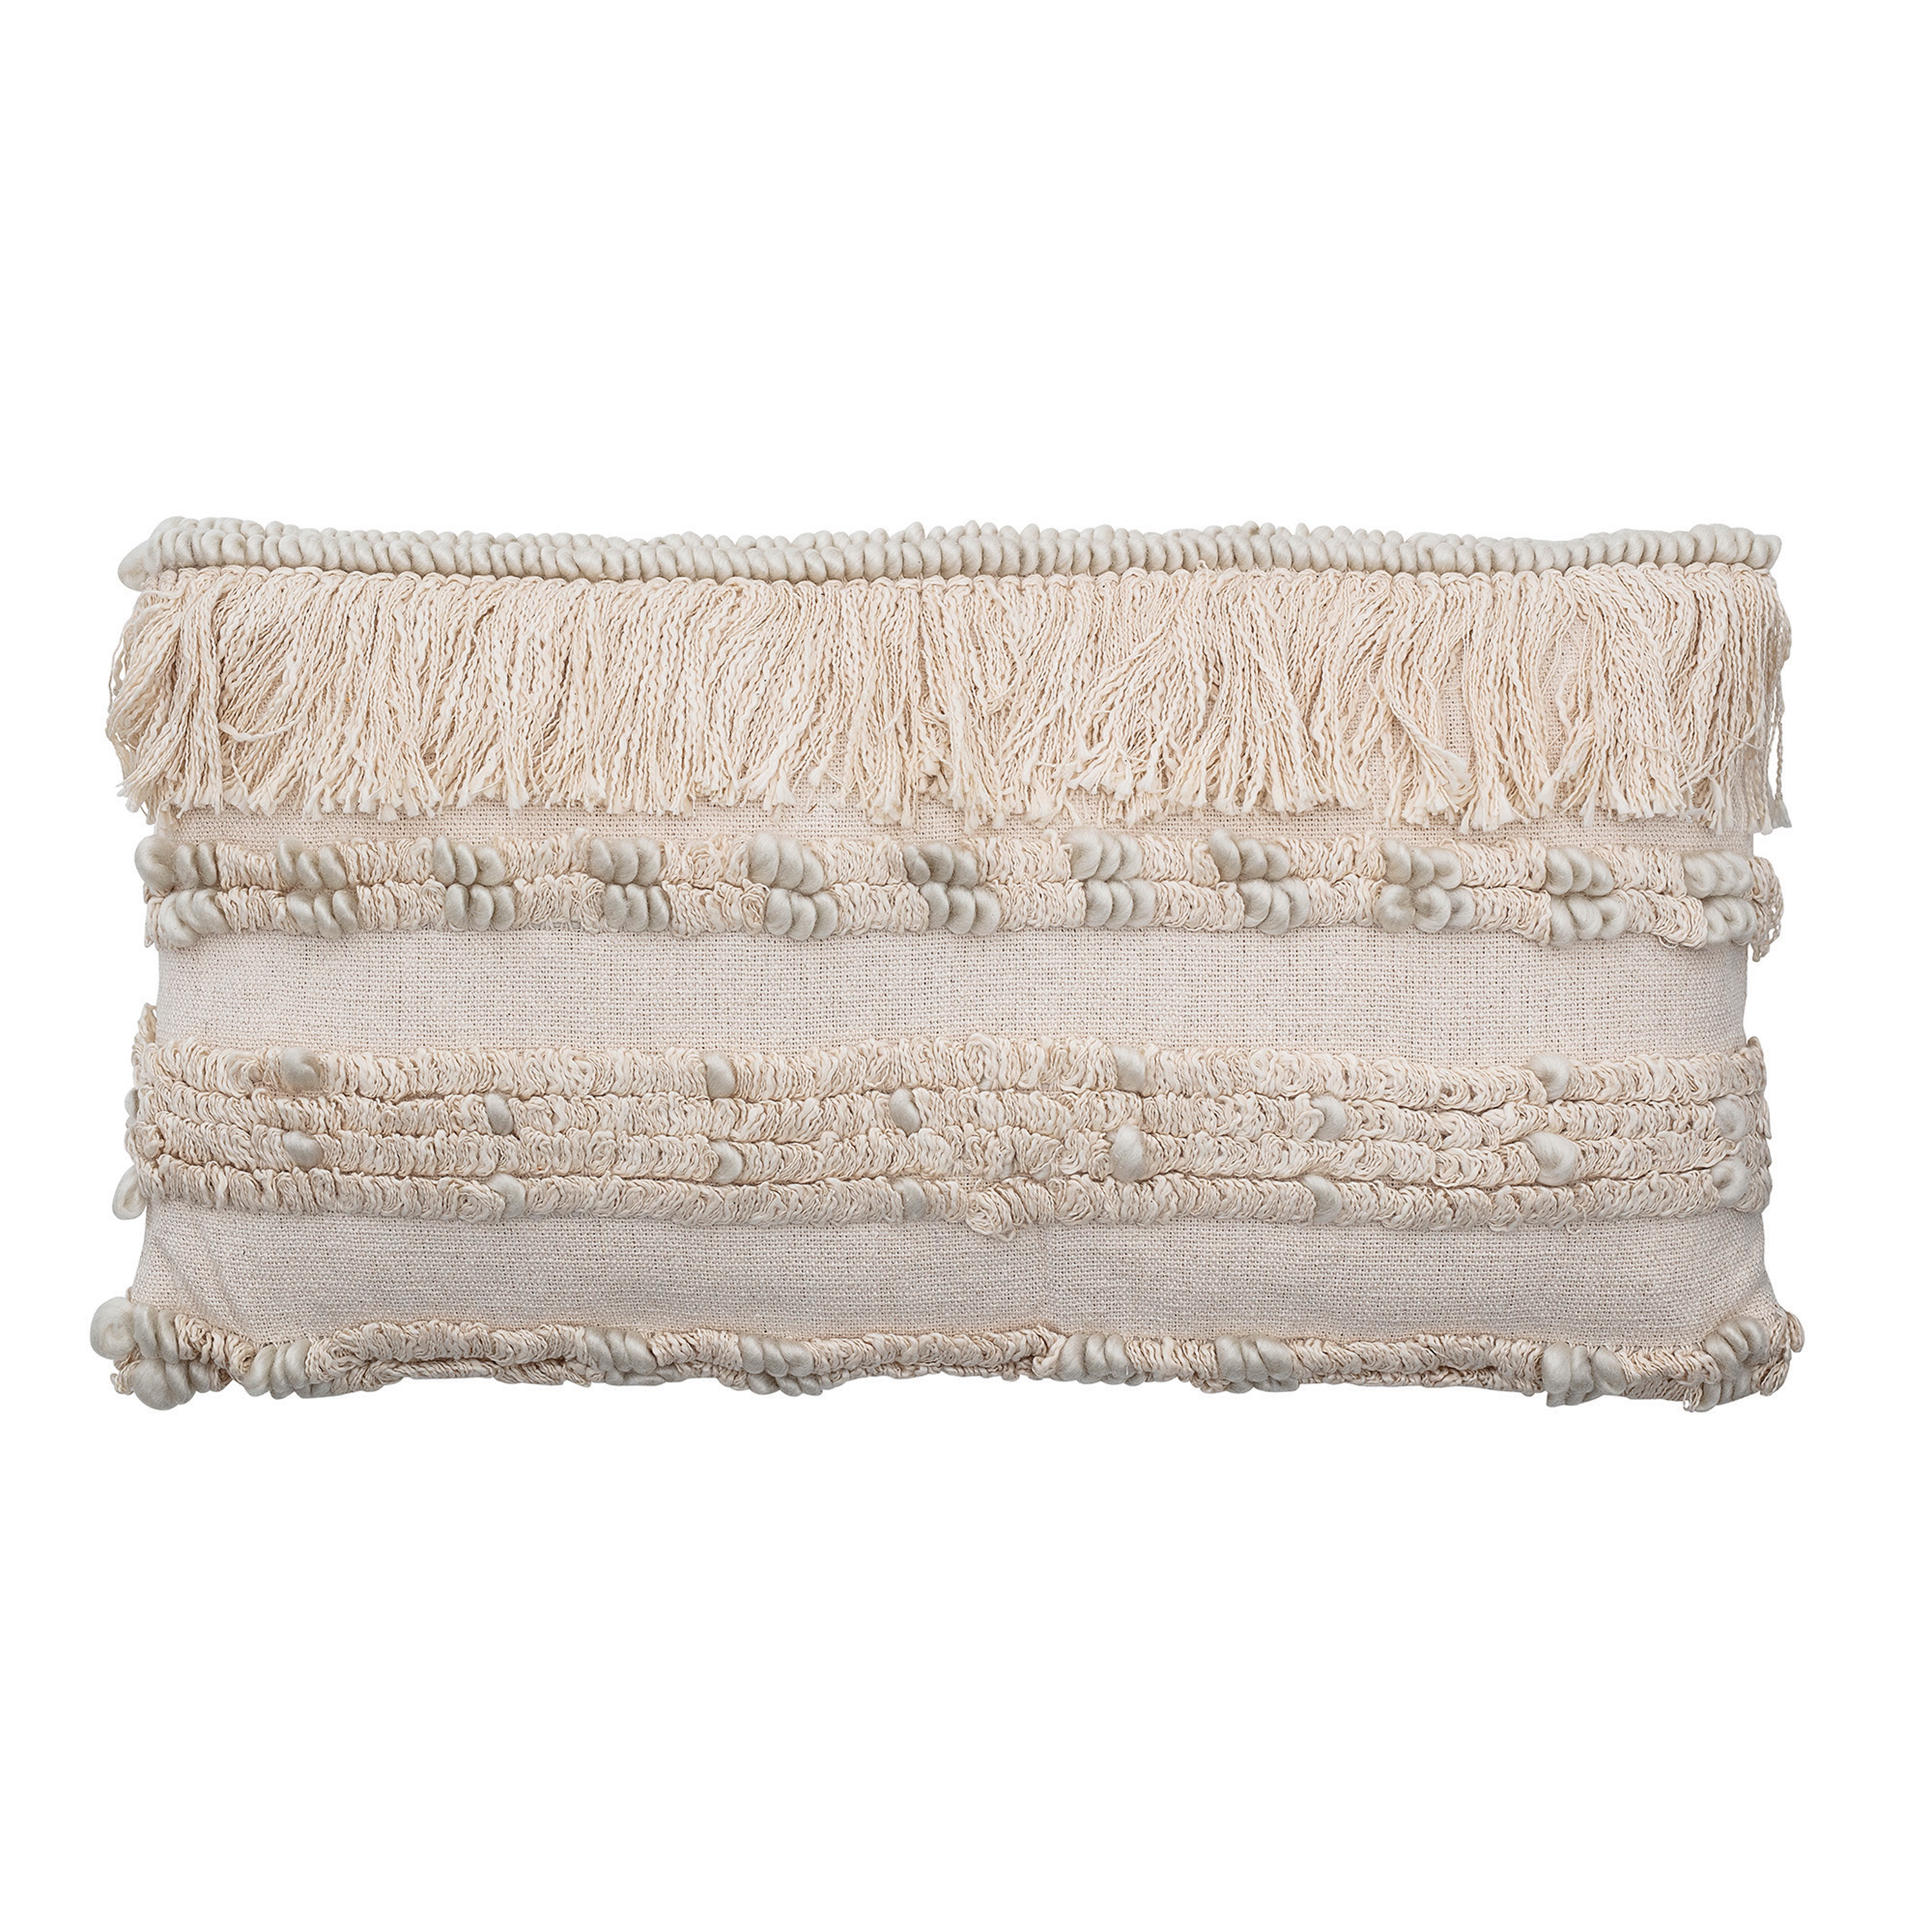 28" Woven Cotton & Wool Blend Lumbar Pillow with Fringe - Image 0